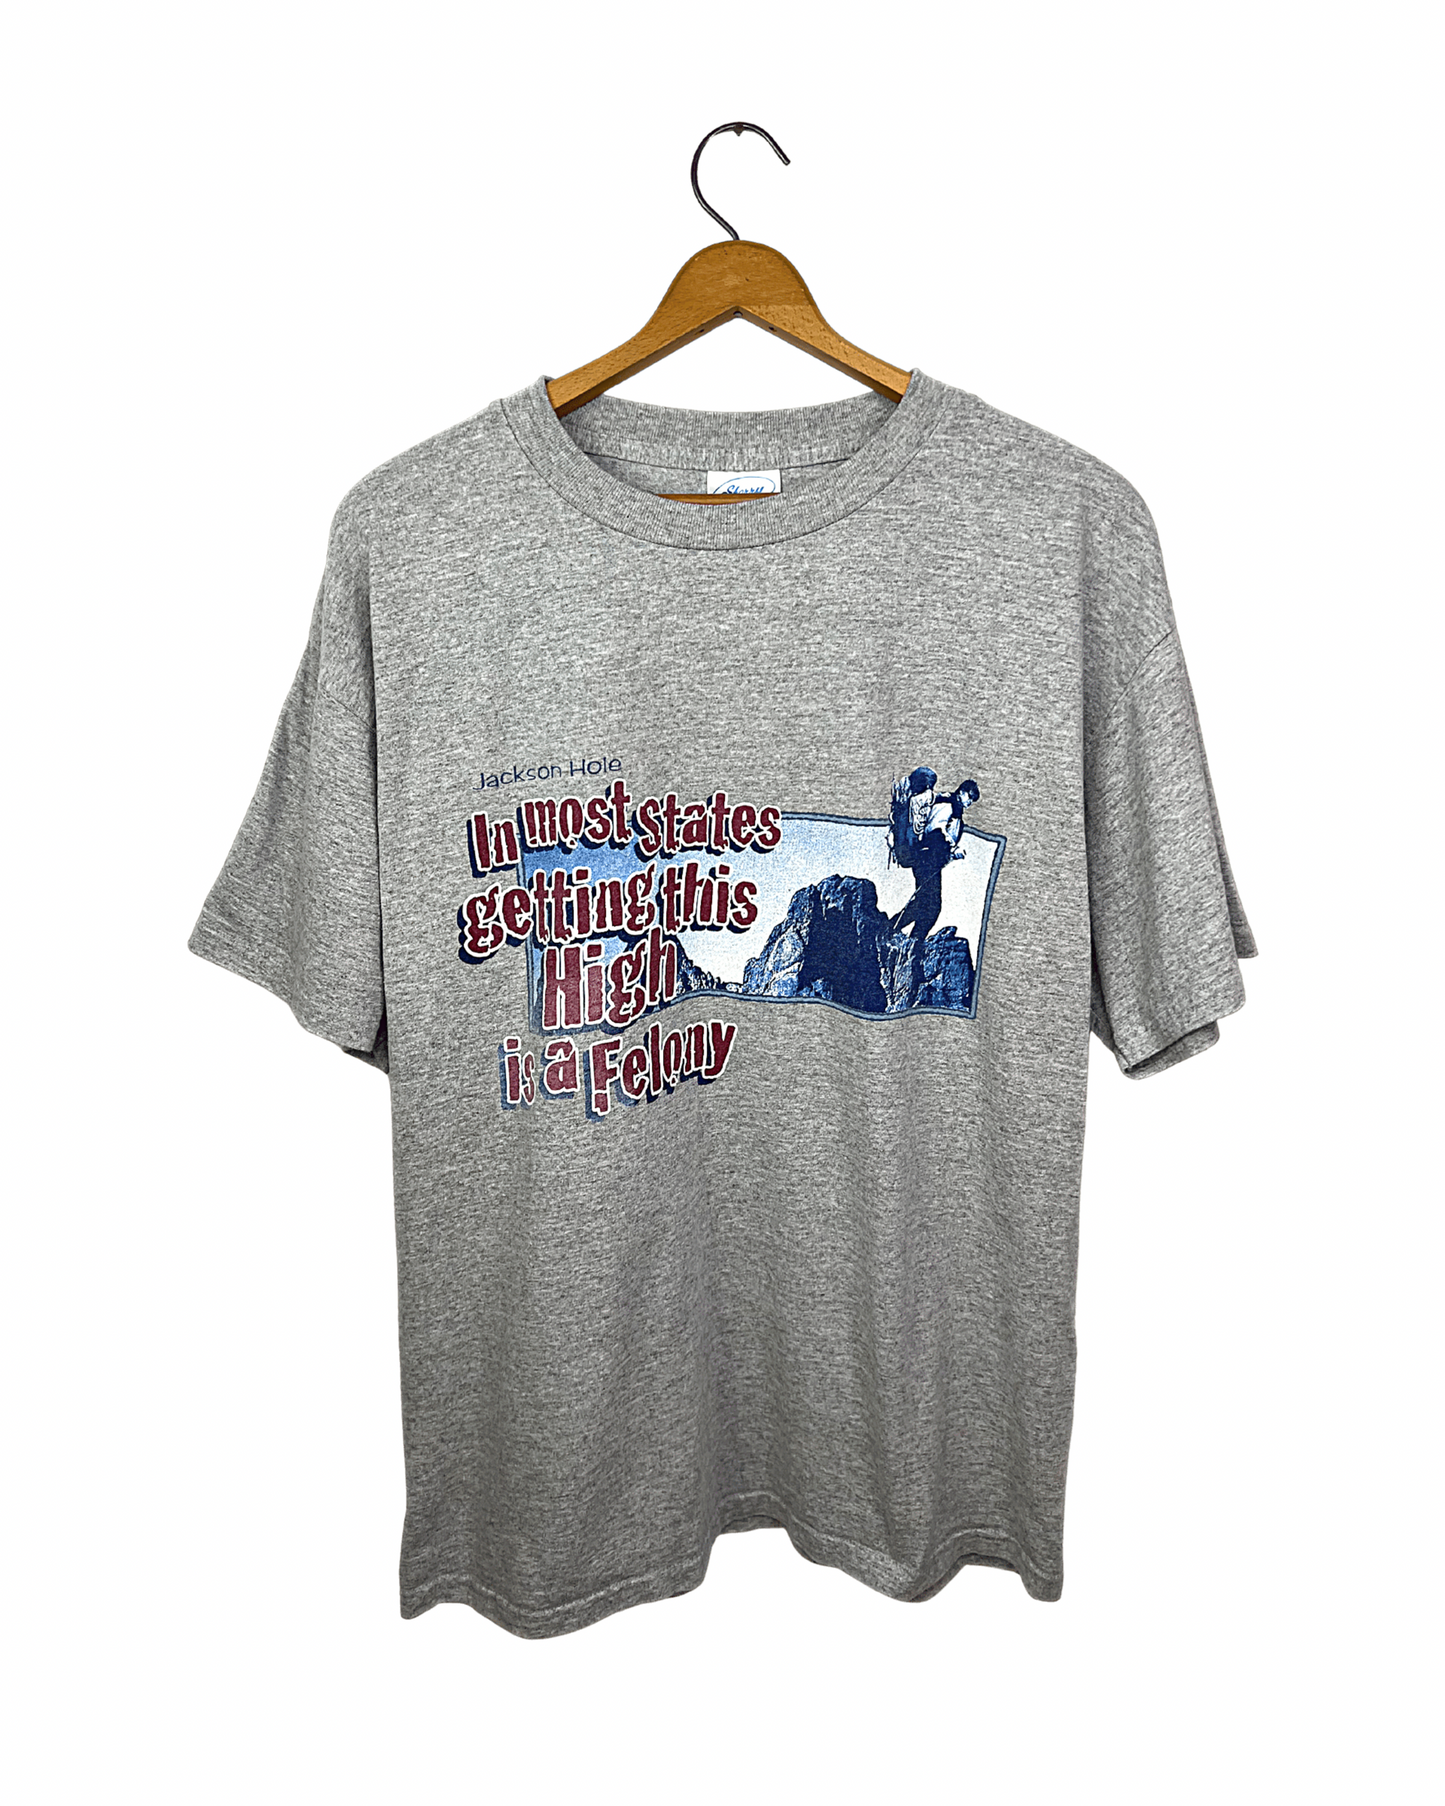 90’s “In Most States Getting This High is a Felony”  Jackson Hole, Wyoming Funny Hiking T-shirt